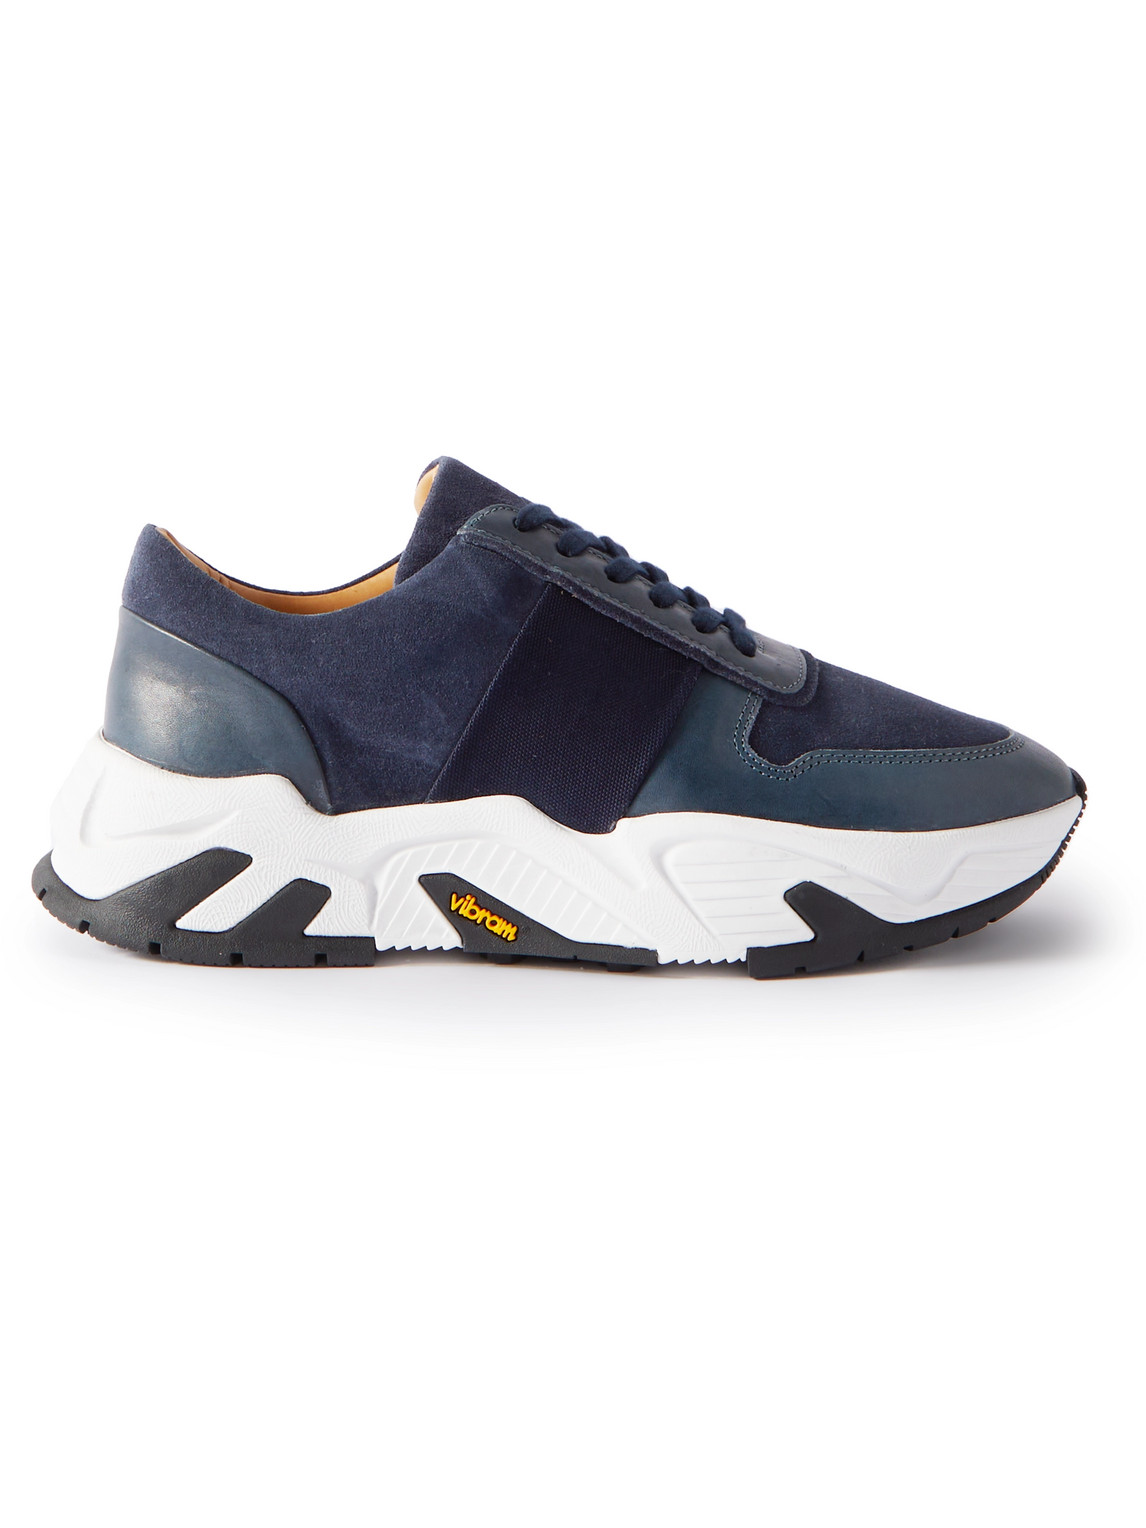 Mr P. Mesh And Leather-trimmed Regenerated Suede By Evolo® Sneakers In Blue